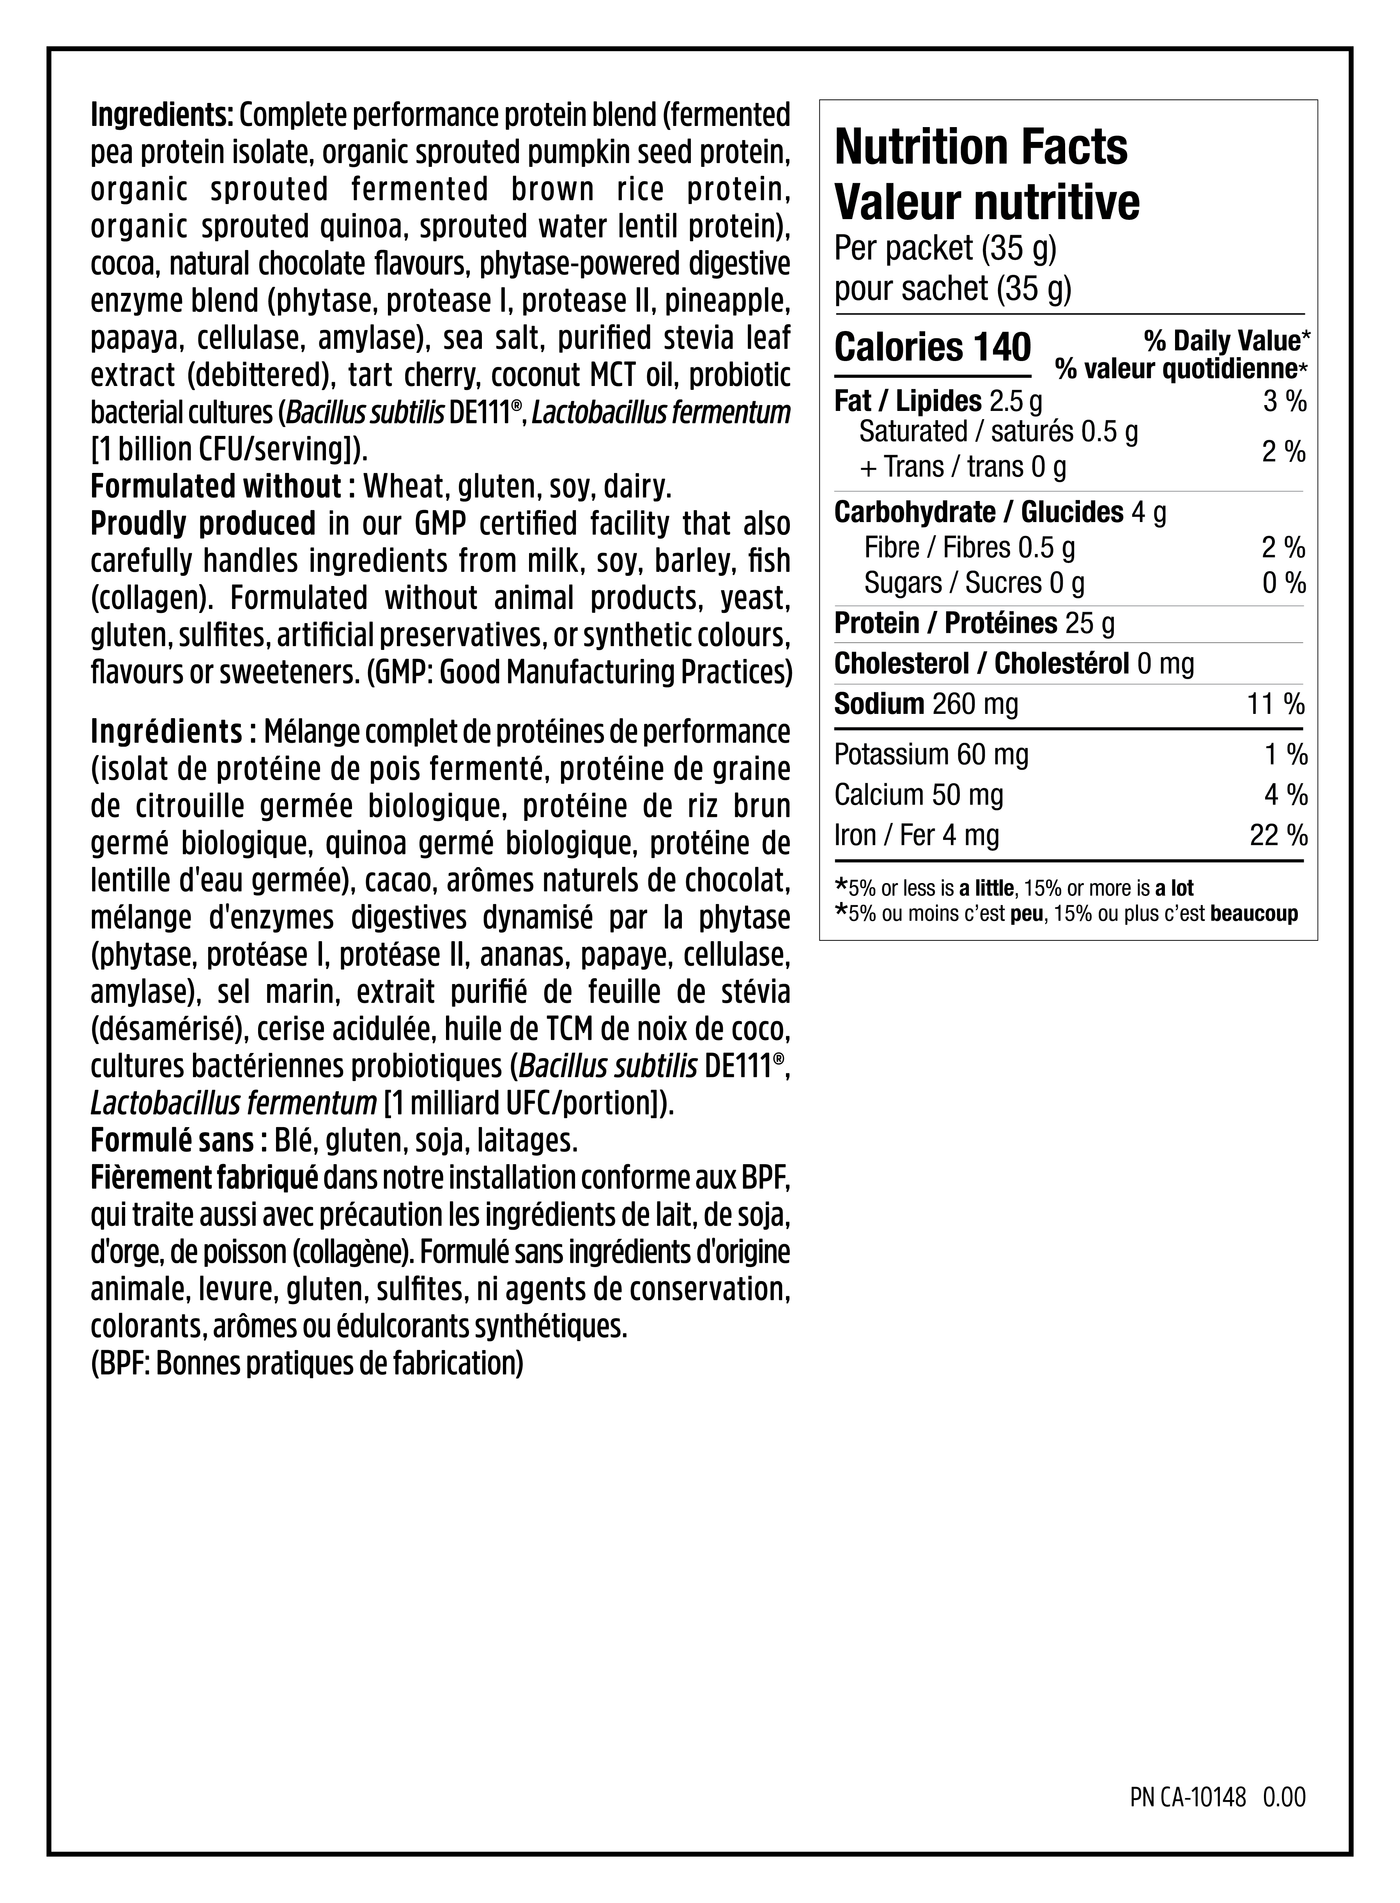 Boosted Plant Protein - 34g - Nutrition Facts